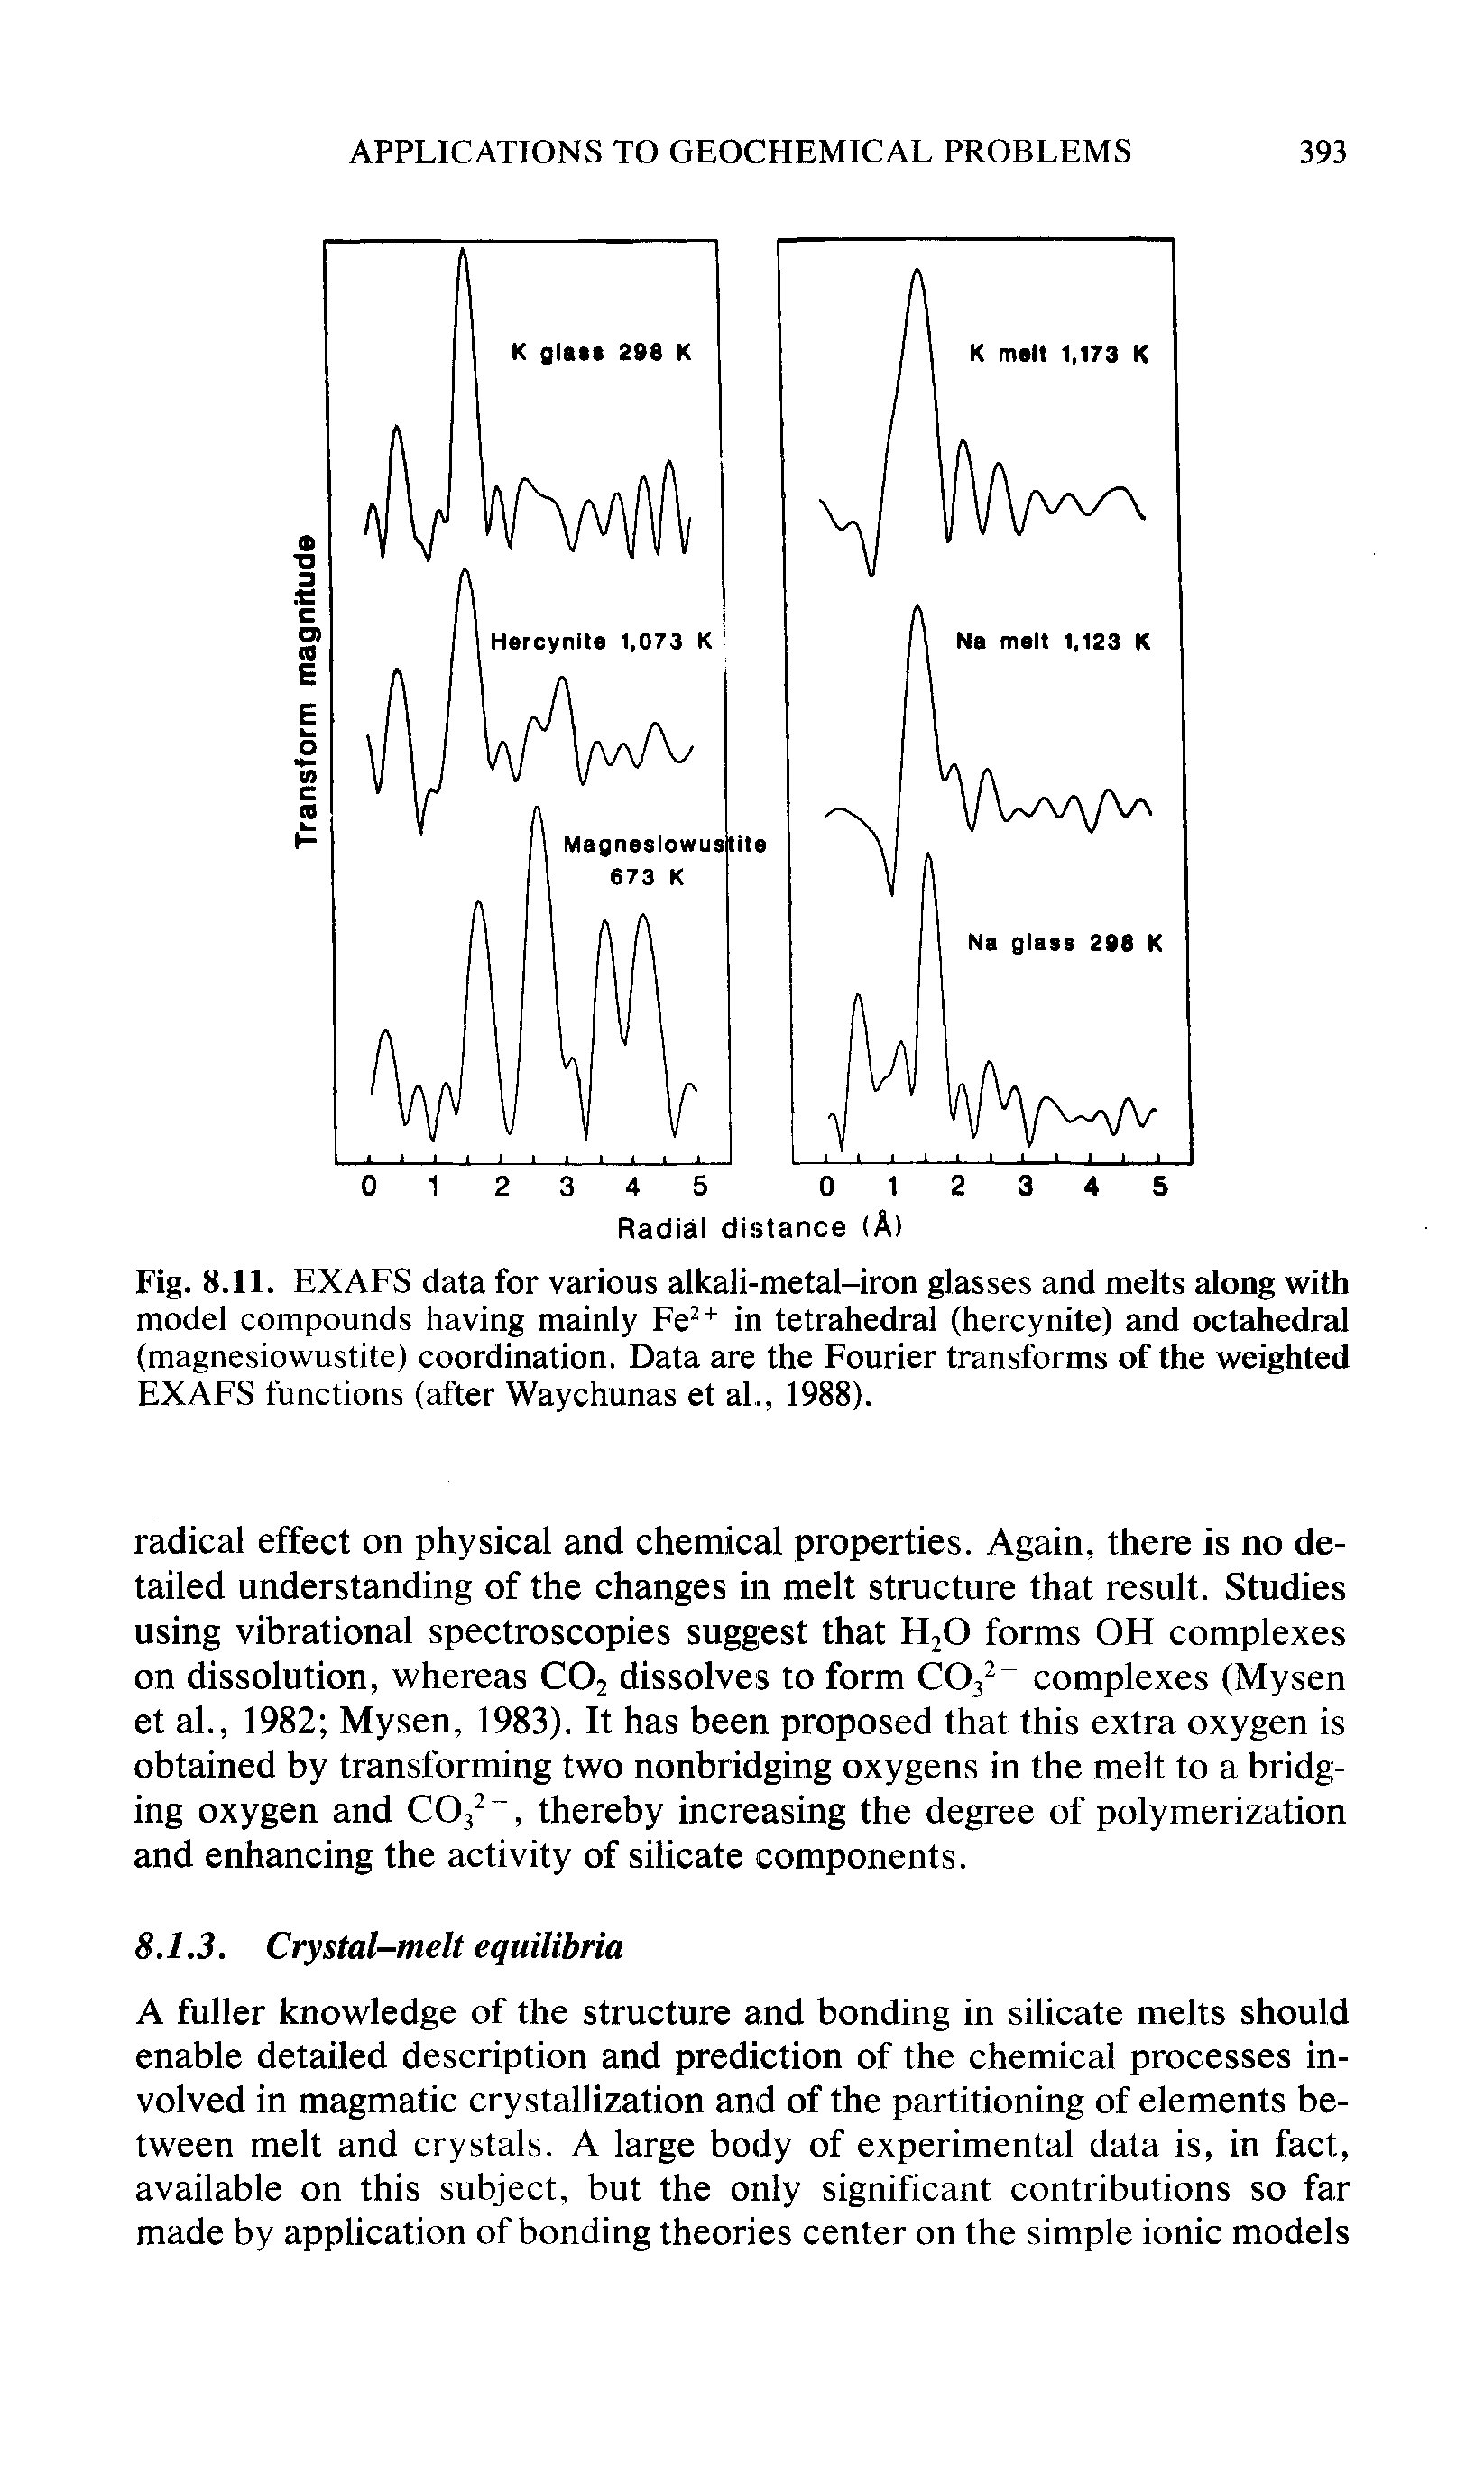 Fig. 8.11. EX AES data for various alkali-metal-iron glasses and melts along with model compounds having mainly Fe + in tetrahedral (hercynite) and octahedral (magnesiowustite) coordination. Data are the Fourier transforms of the weighted EXAFS functions (after Waychunas et al., 1988).